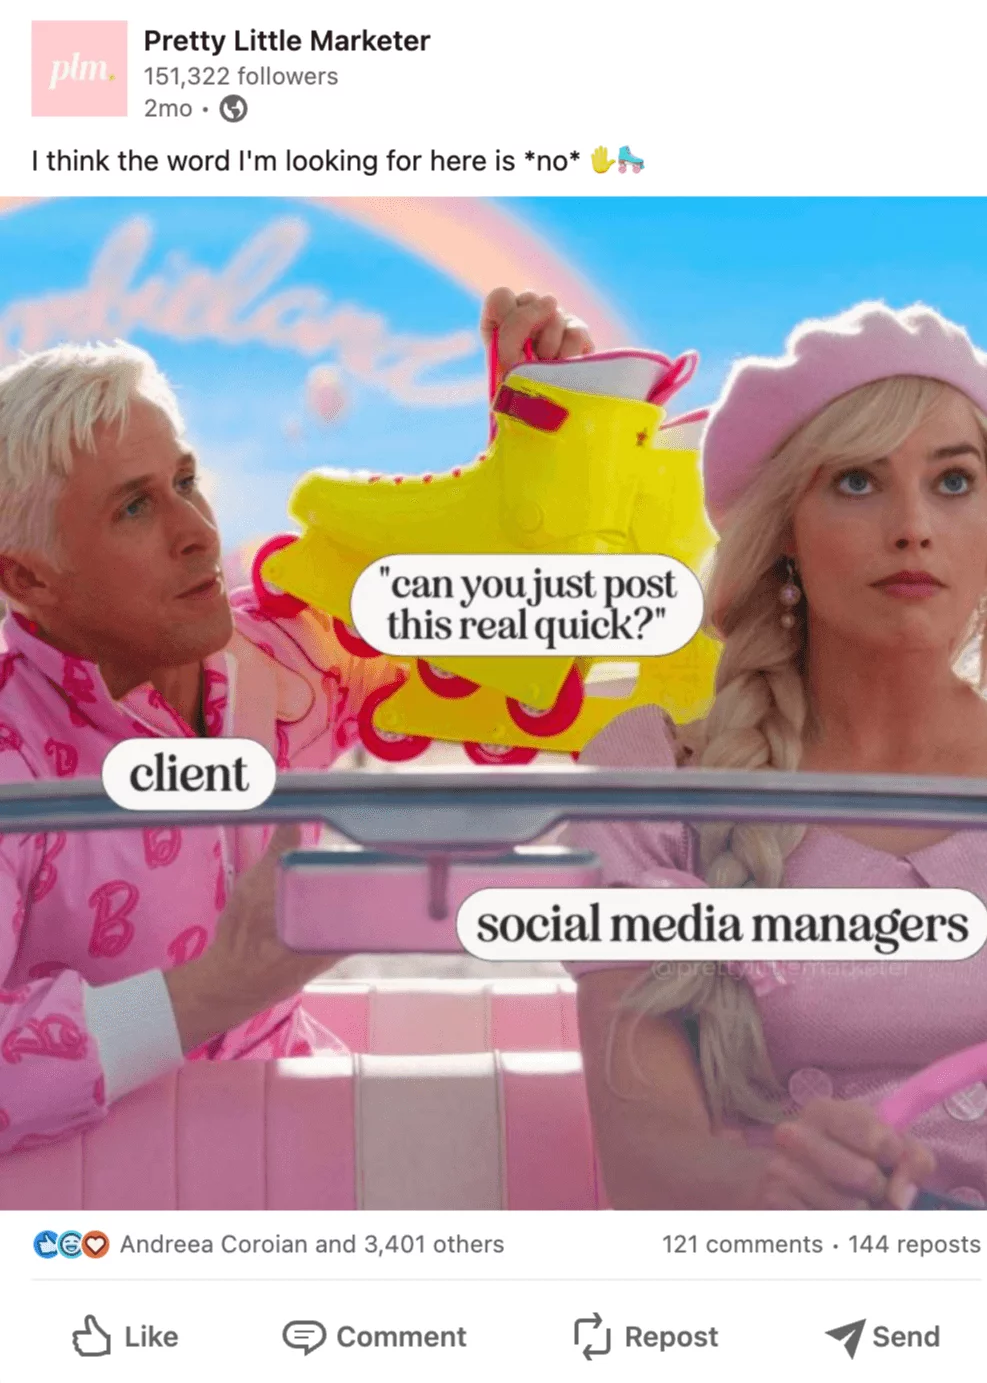 LinkedIn post from Pretty Little Marketer depicting a Barbie movie inspired joke about a client asking the social media manager to just post something real quick.